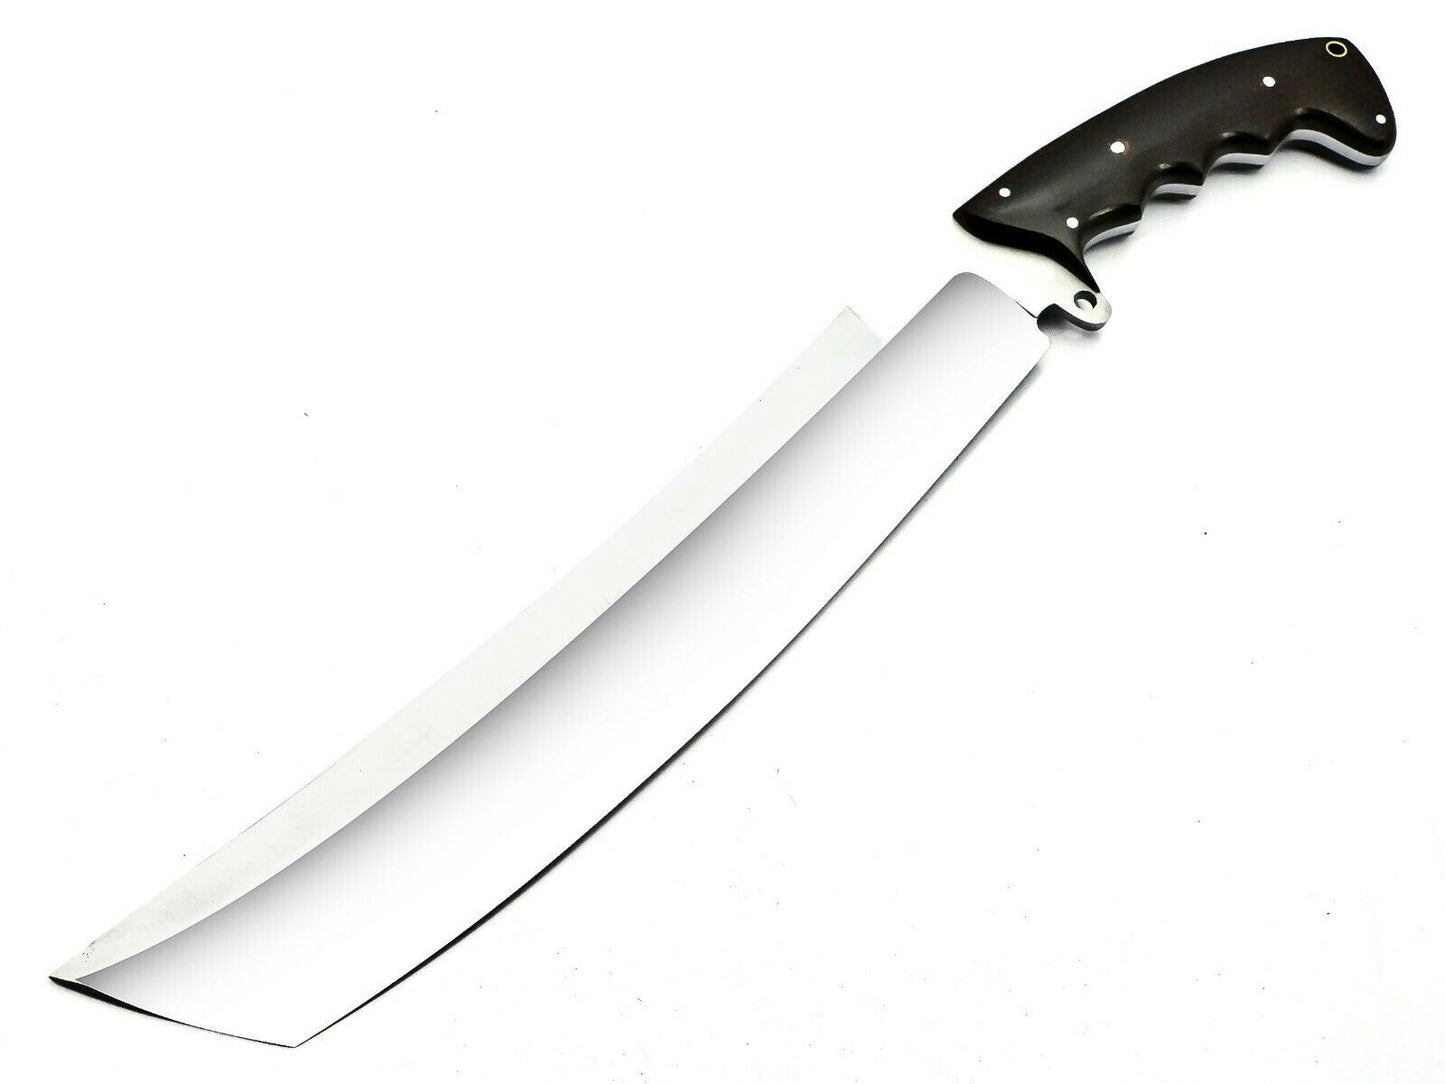 All Purpose Handmade Machete Full Tang Hunting, Tactical,Survival and collectible knife, SHARP 18” Sheath included